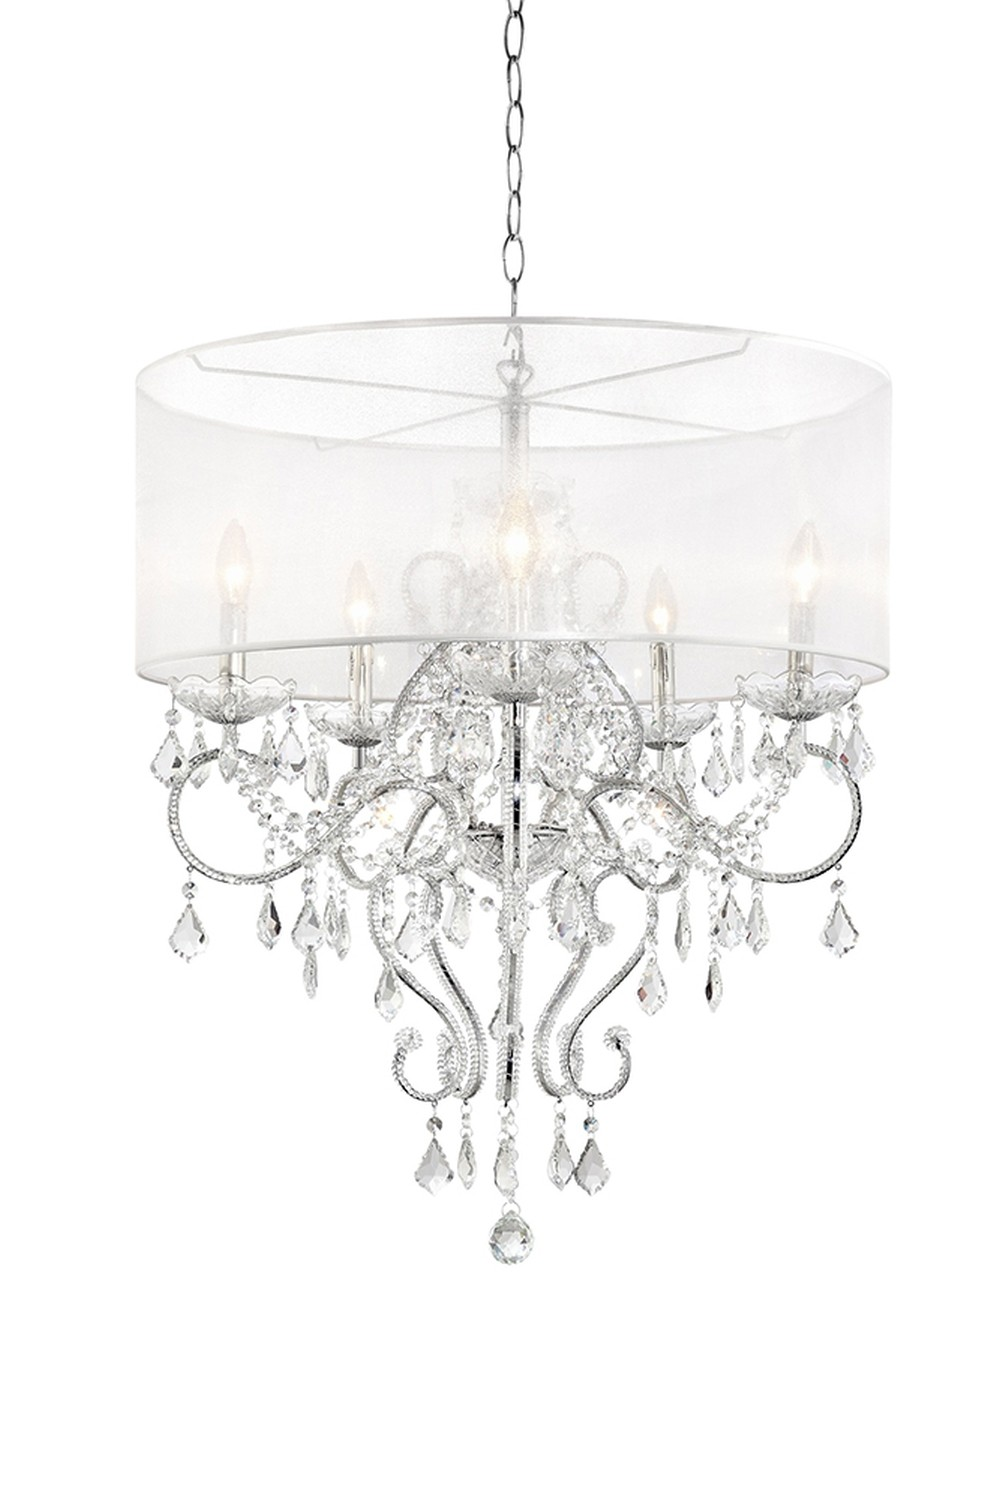 Elegant Hanging Chandelier With White/Ivory Sheer Shade & Crystal Accents (26.0"W x 31.5"H)